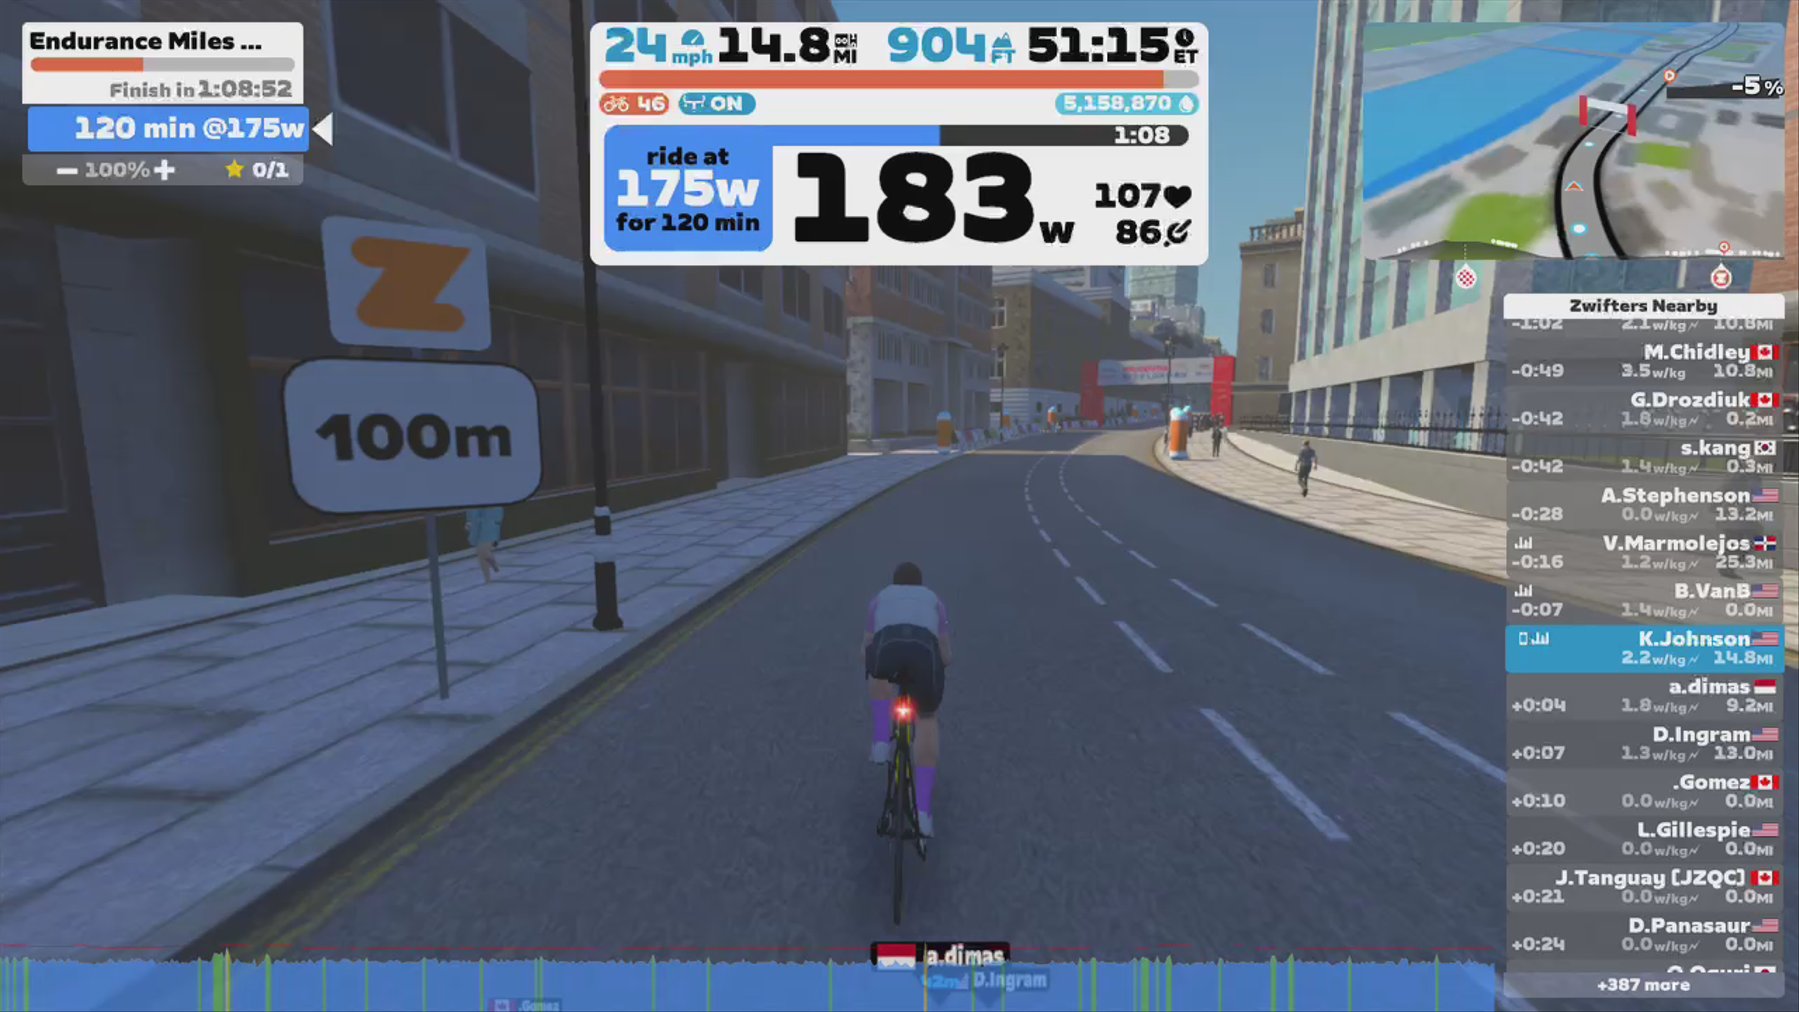 Zwift - Endurance Miles 2.00hrs in London